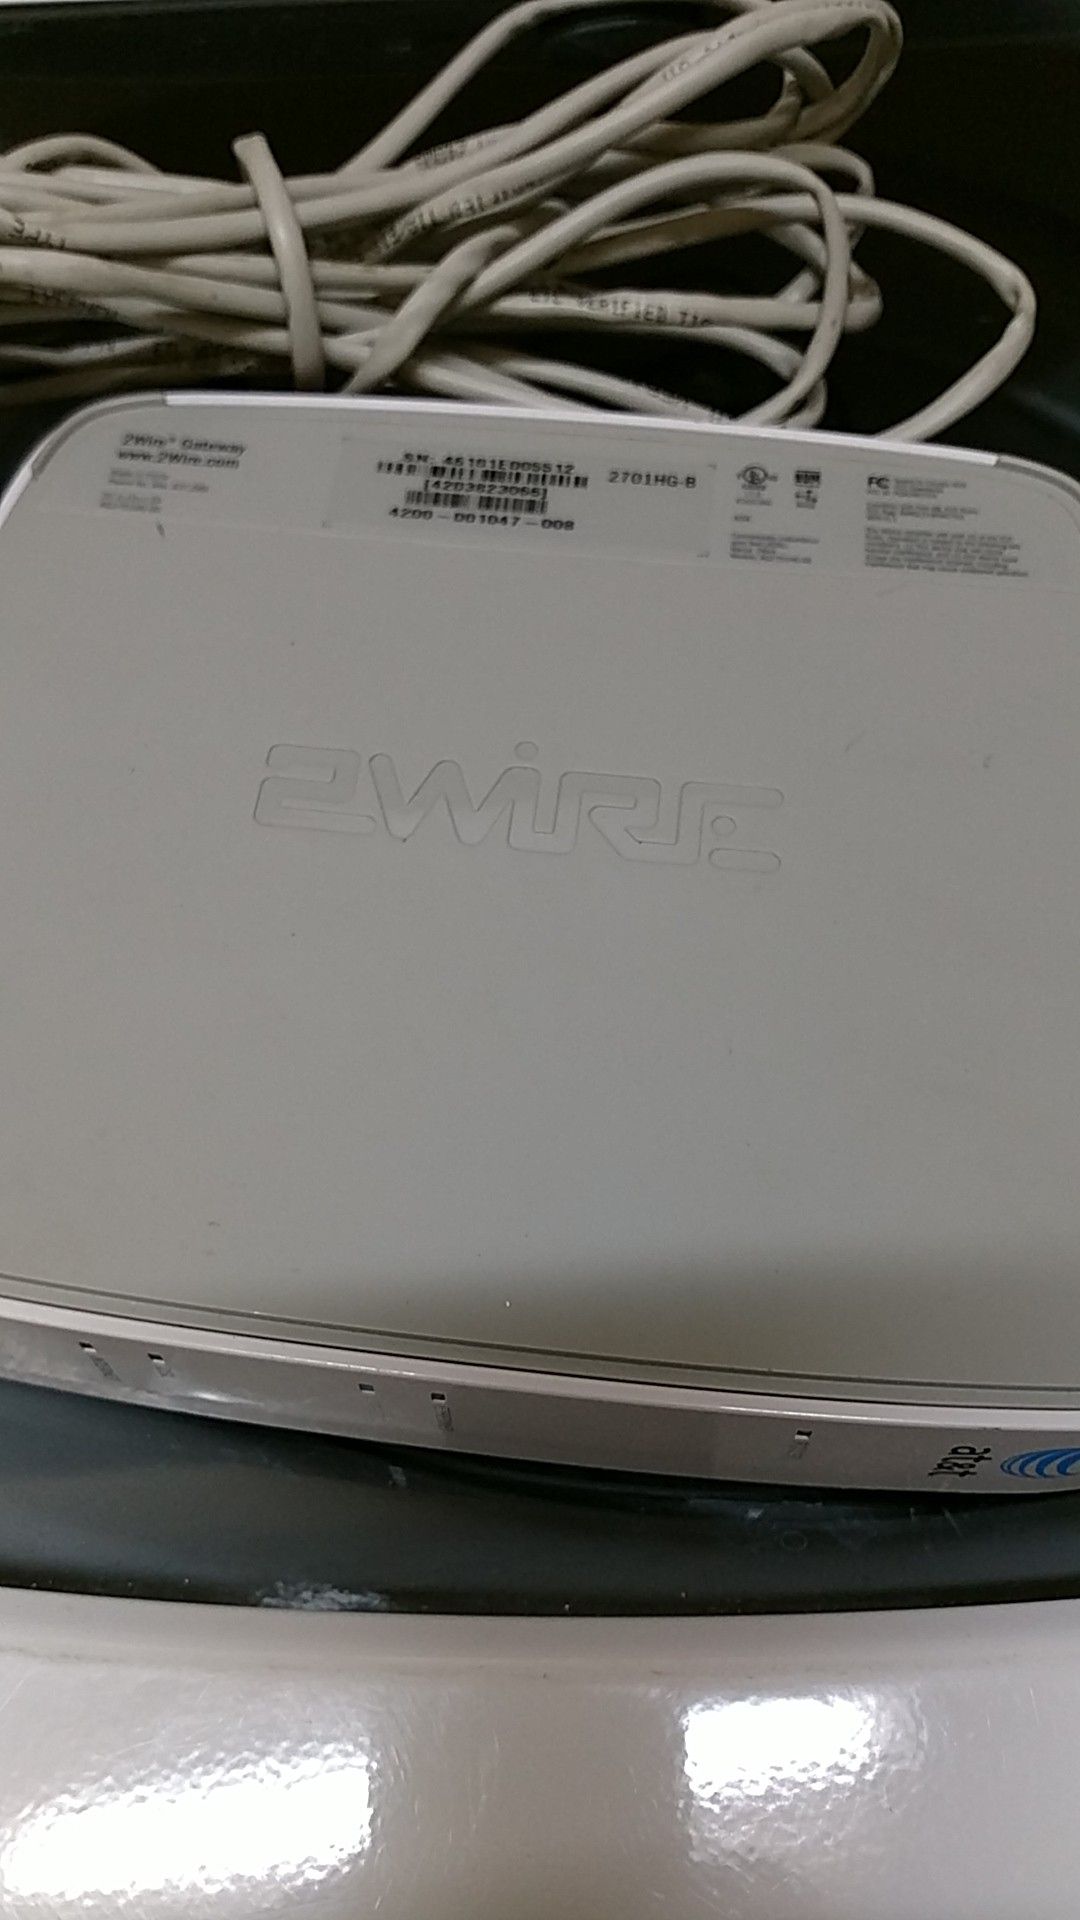 At&t 2wire 2701hg-b gateway